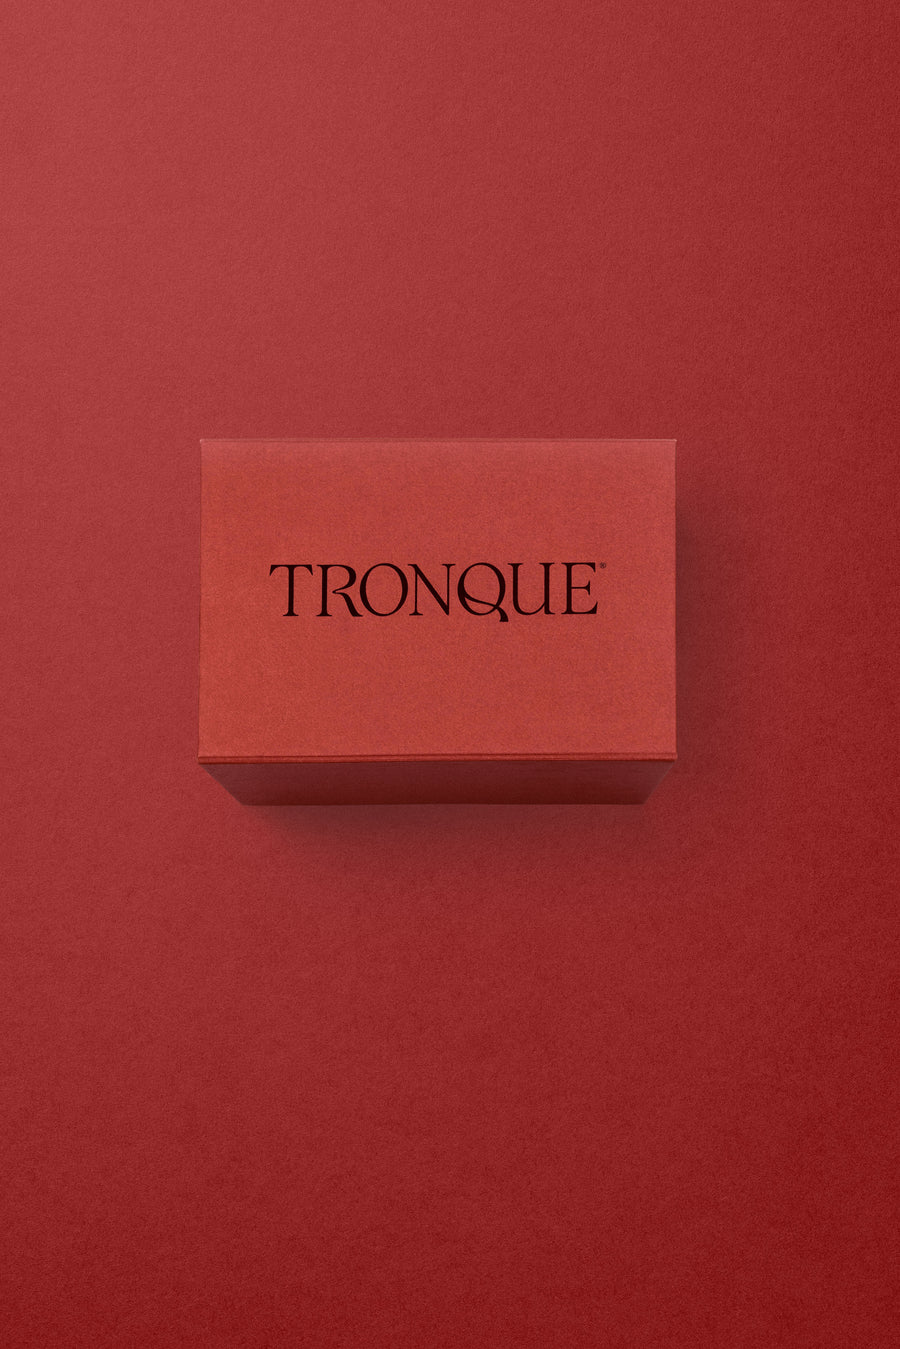 TRONQUE gift card